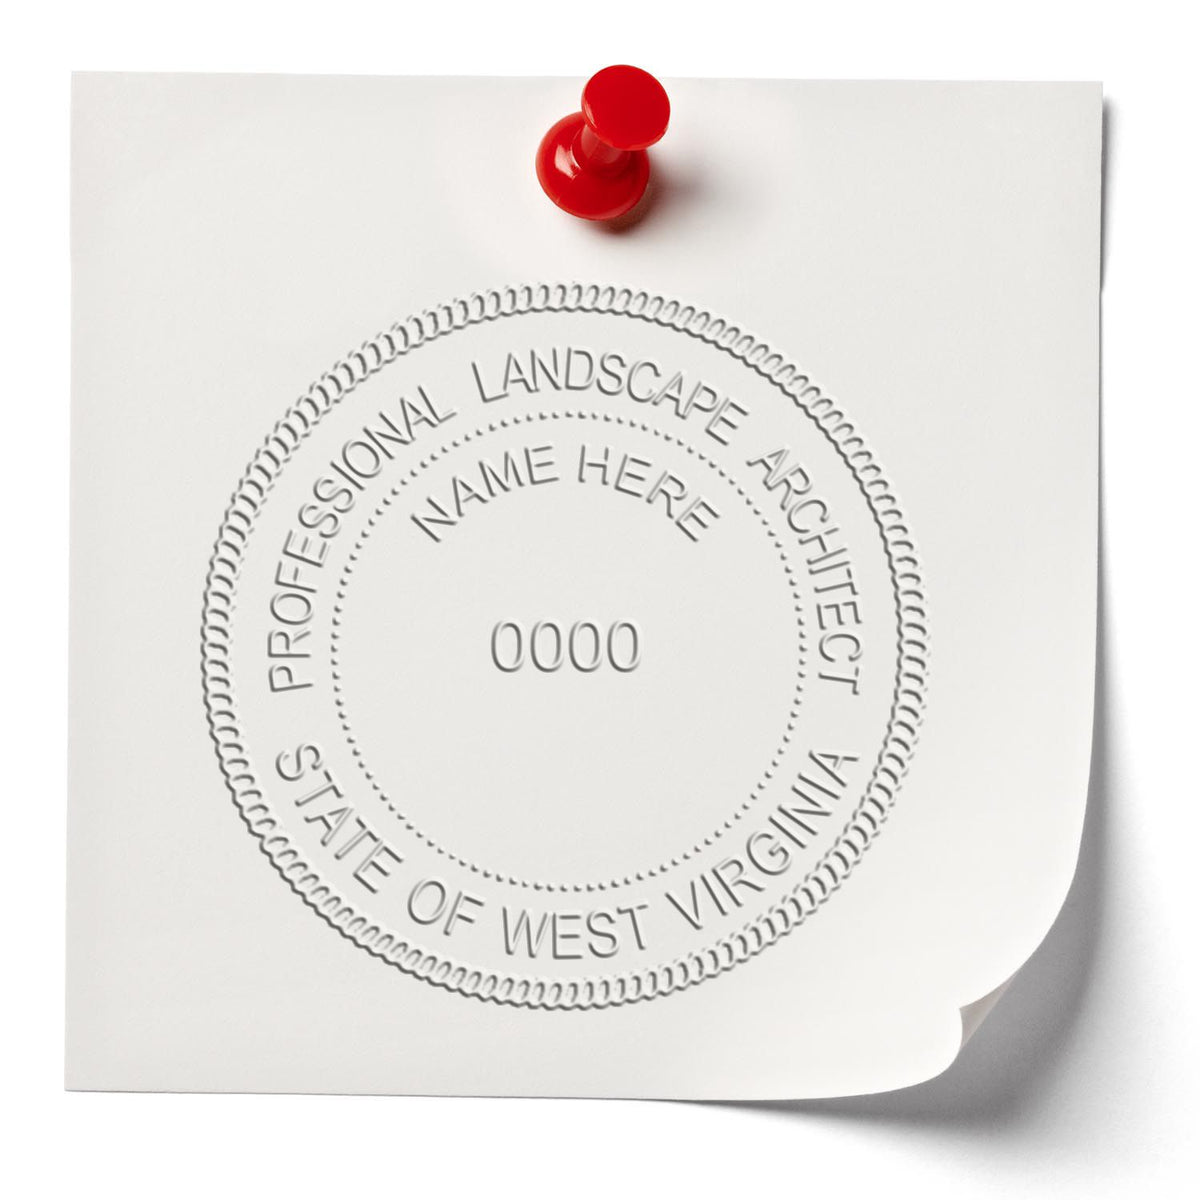 The Gift West Virginia Landscape Architect Seal stamp impression comes to life with a crisp, detailed image stamped on paper - showcasing true professional quality.